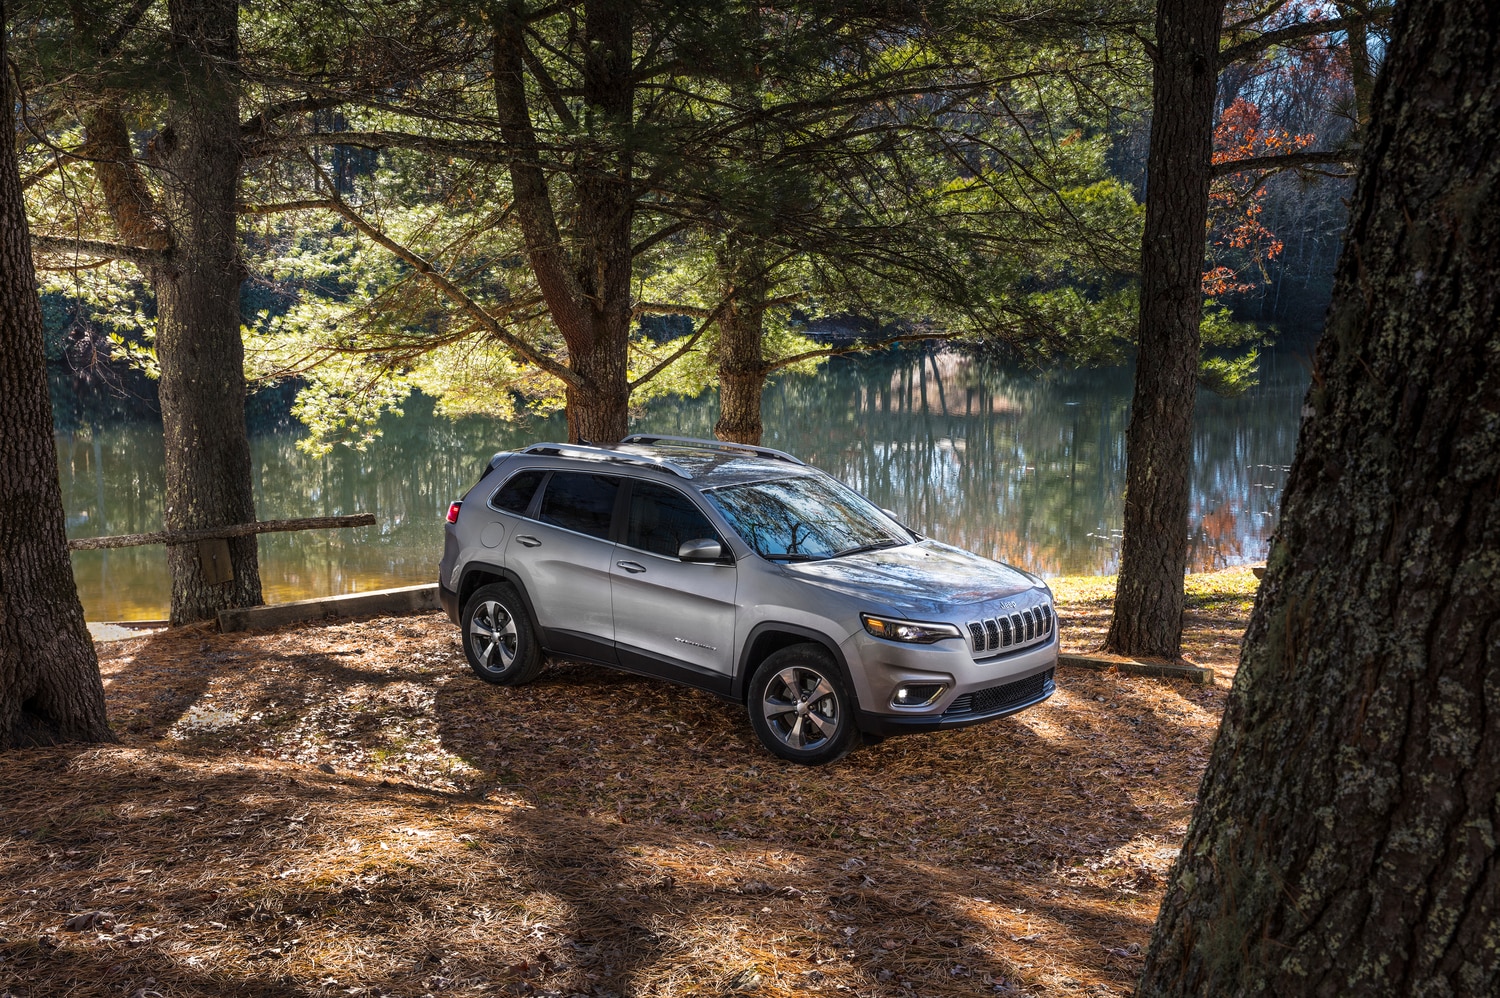 silver Jeep Cherokee Limited SUV parked next to a river in a forest clearing